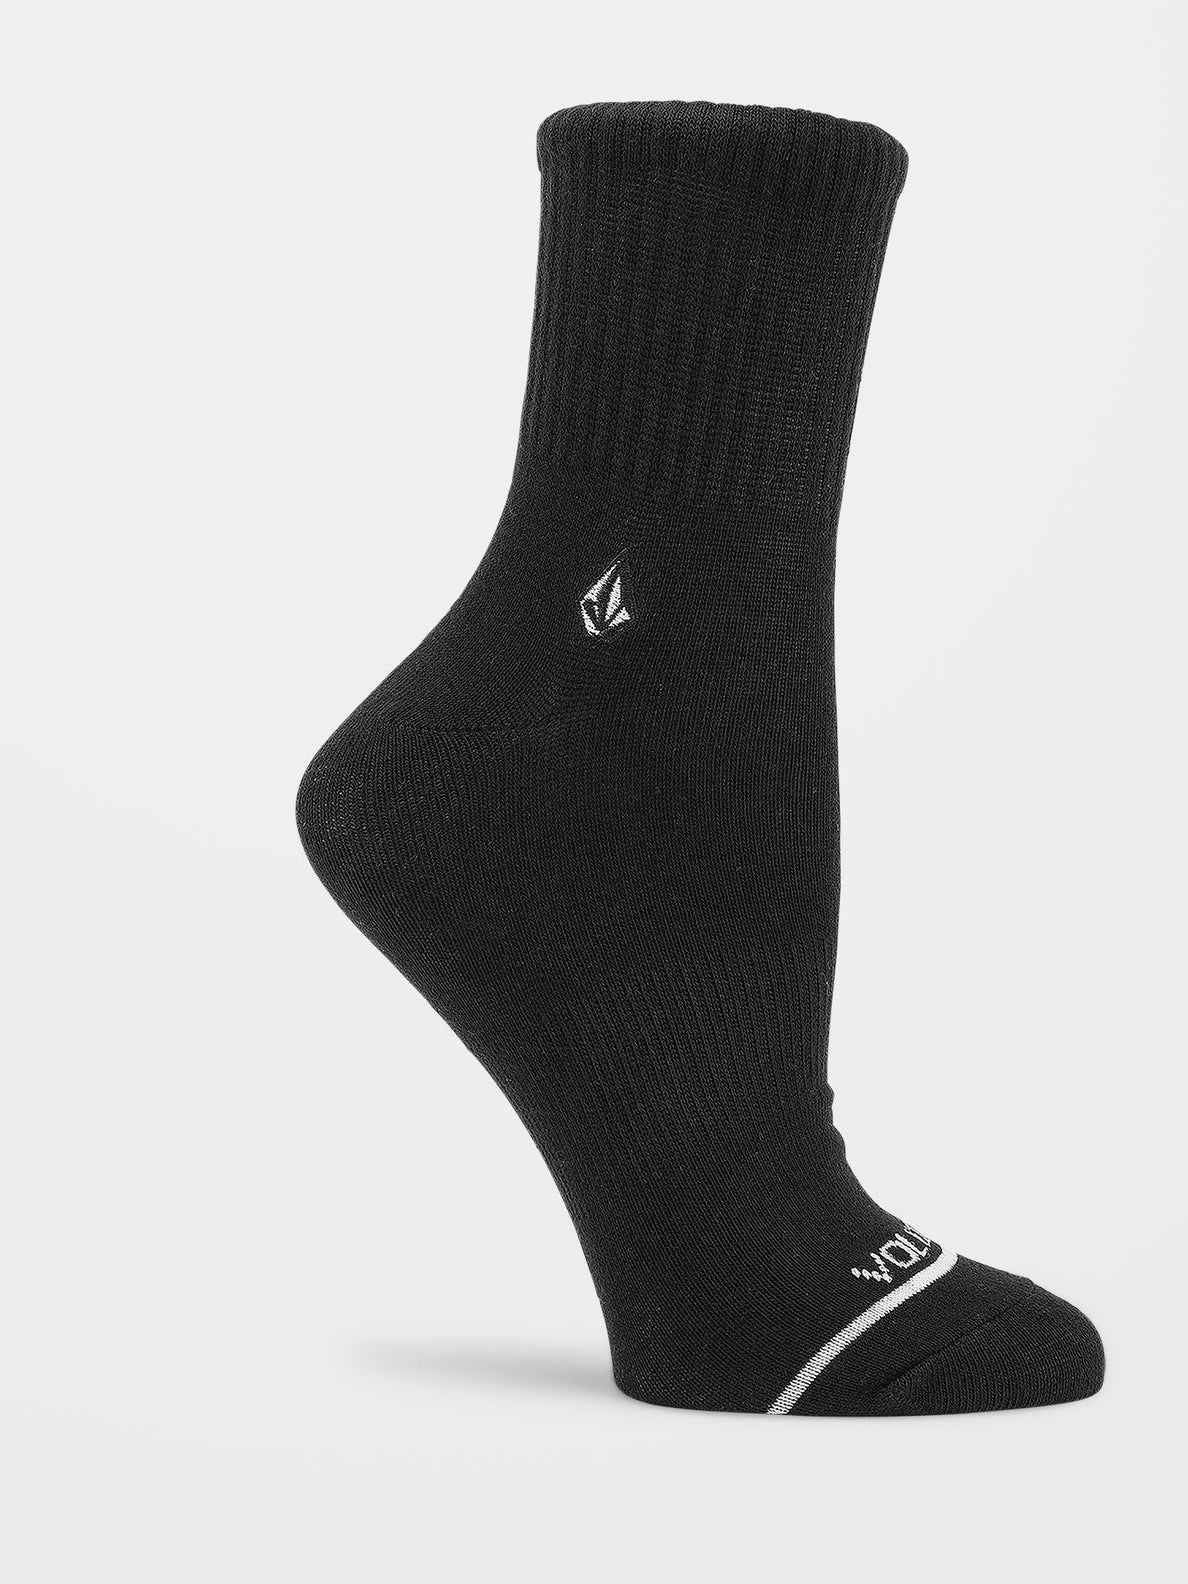 The New Crew Socks (3 pack) - ASSORTED COLORS (E6332200_AST) [B]